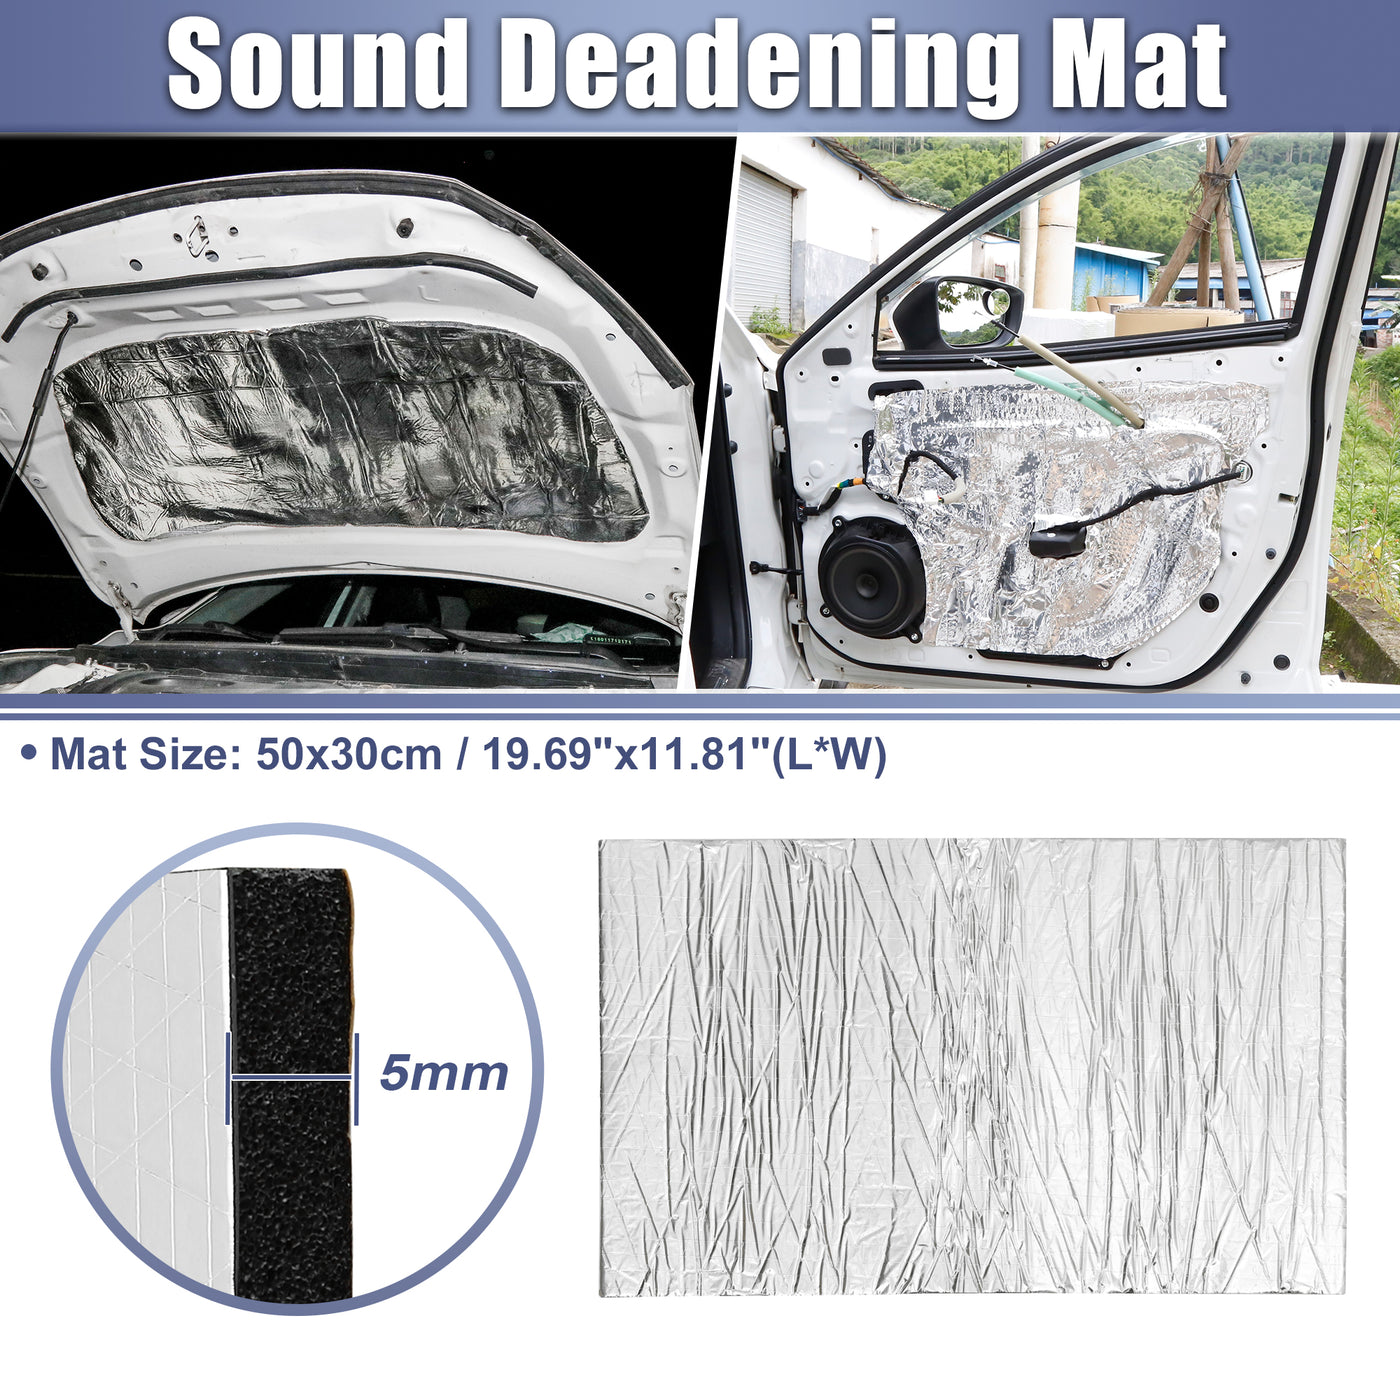 X AUTOHAUX 197mil 5mm 1.61sqft Car Sound Deadening Mat Aluminum Foil Closed Cell Foam Heat Shield Material Damping Self Adhesive Universal for Hood Fender and Boat Engine Cover 19.69"x11.81"